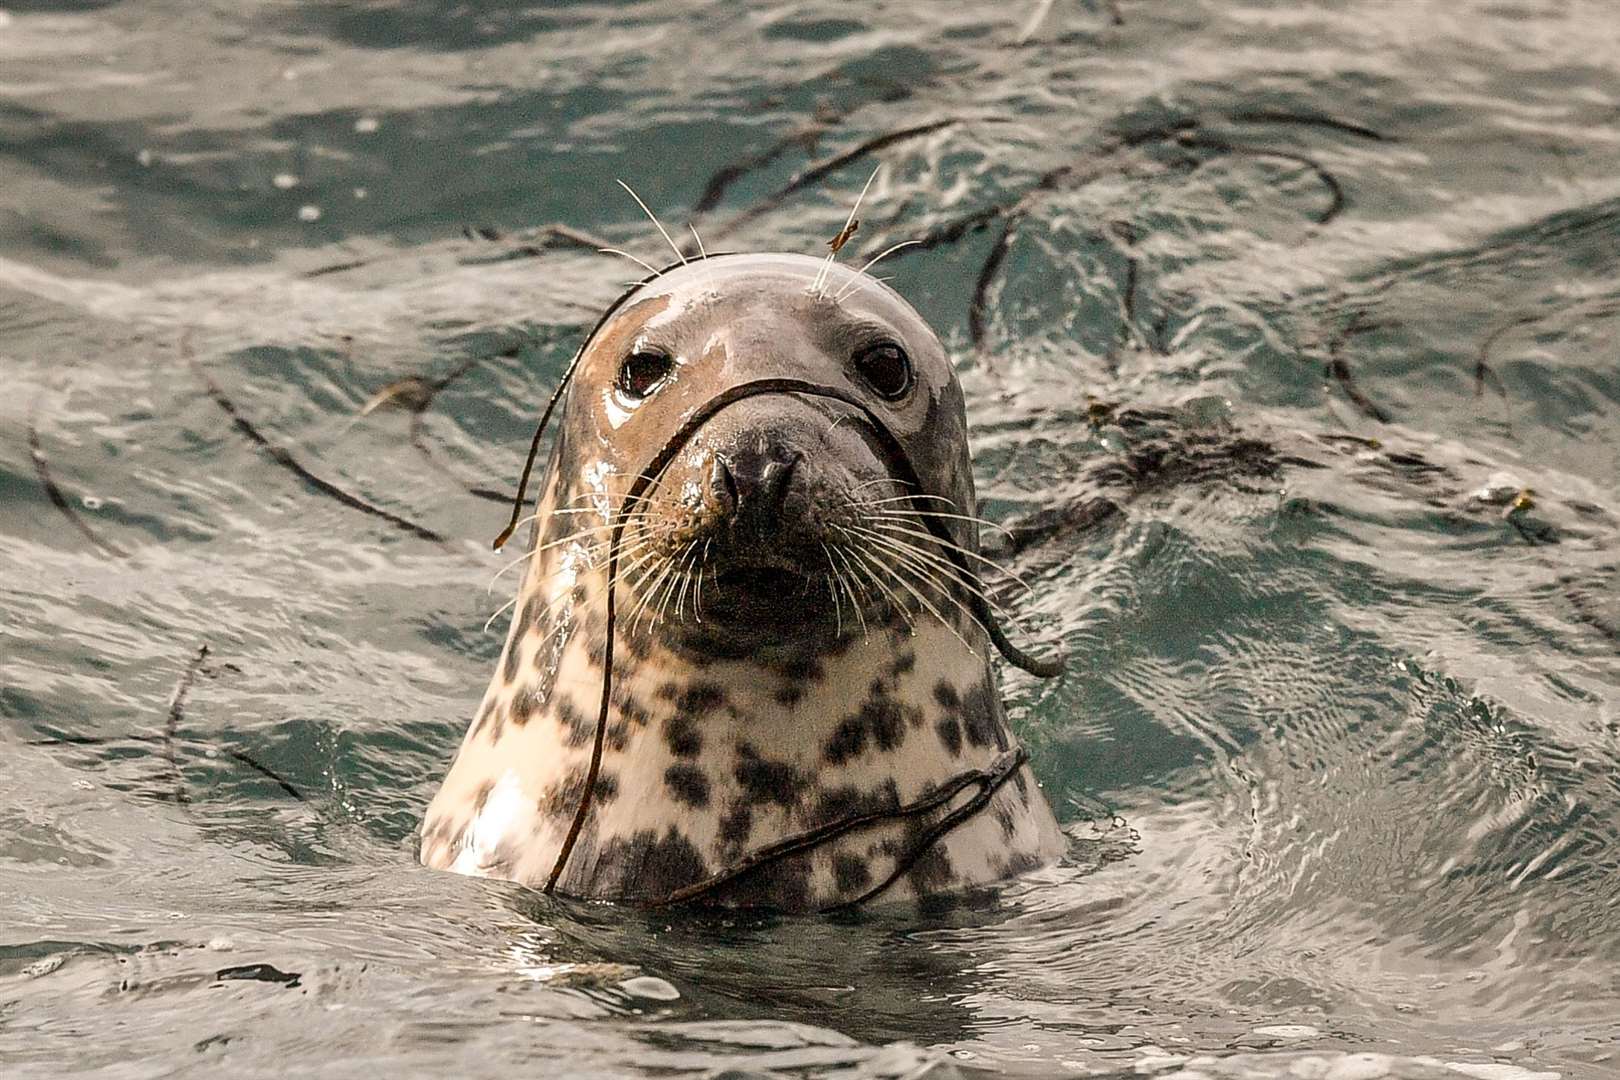 A female Atlantic grey seal in the sea covered in seaweed (Ben Birchall/PA)